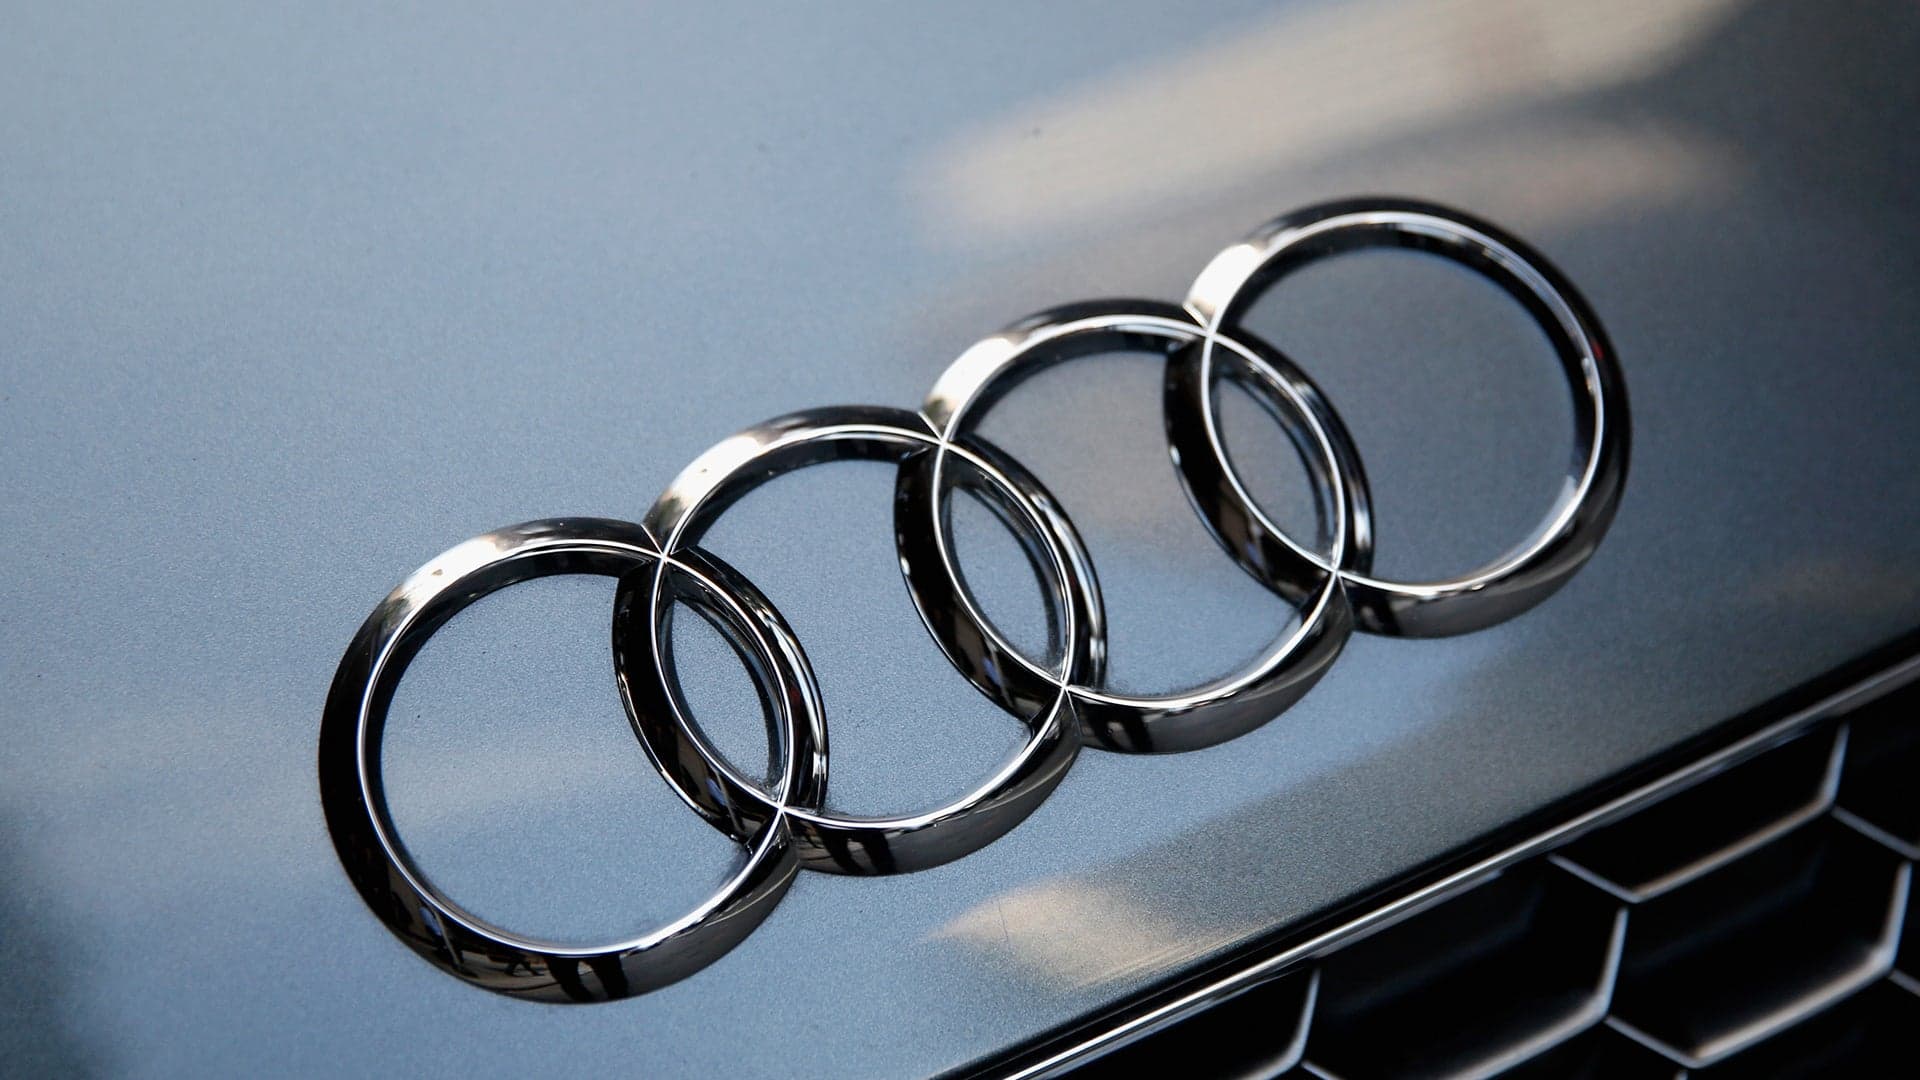 Audi is Developing an Entry-Level, Mass-Market Electric Hatchback: Report